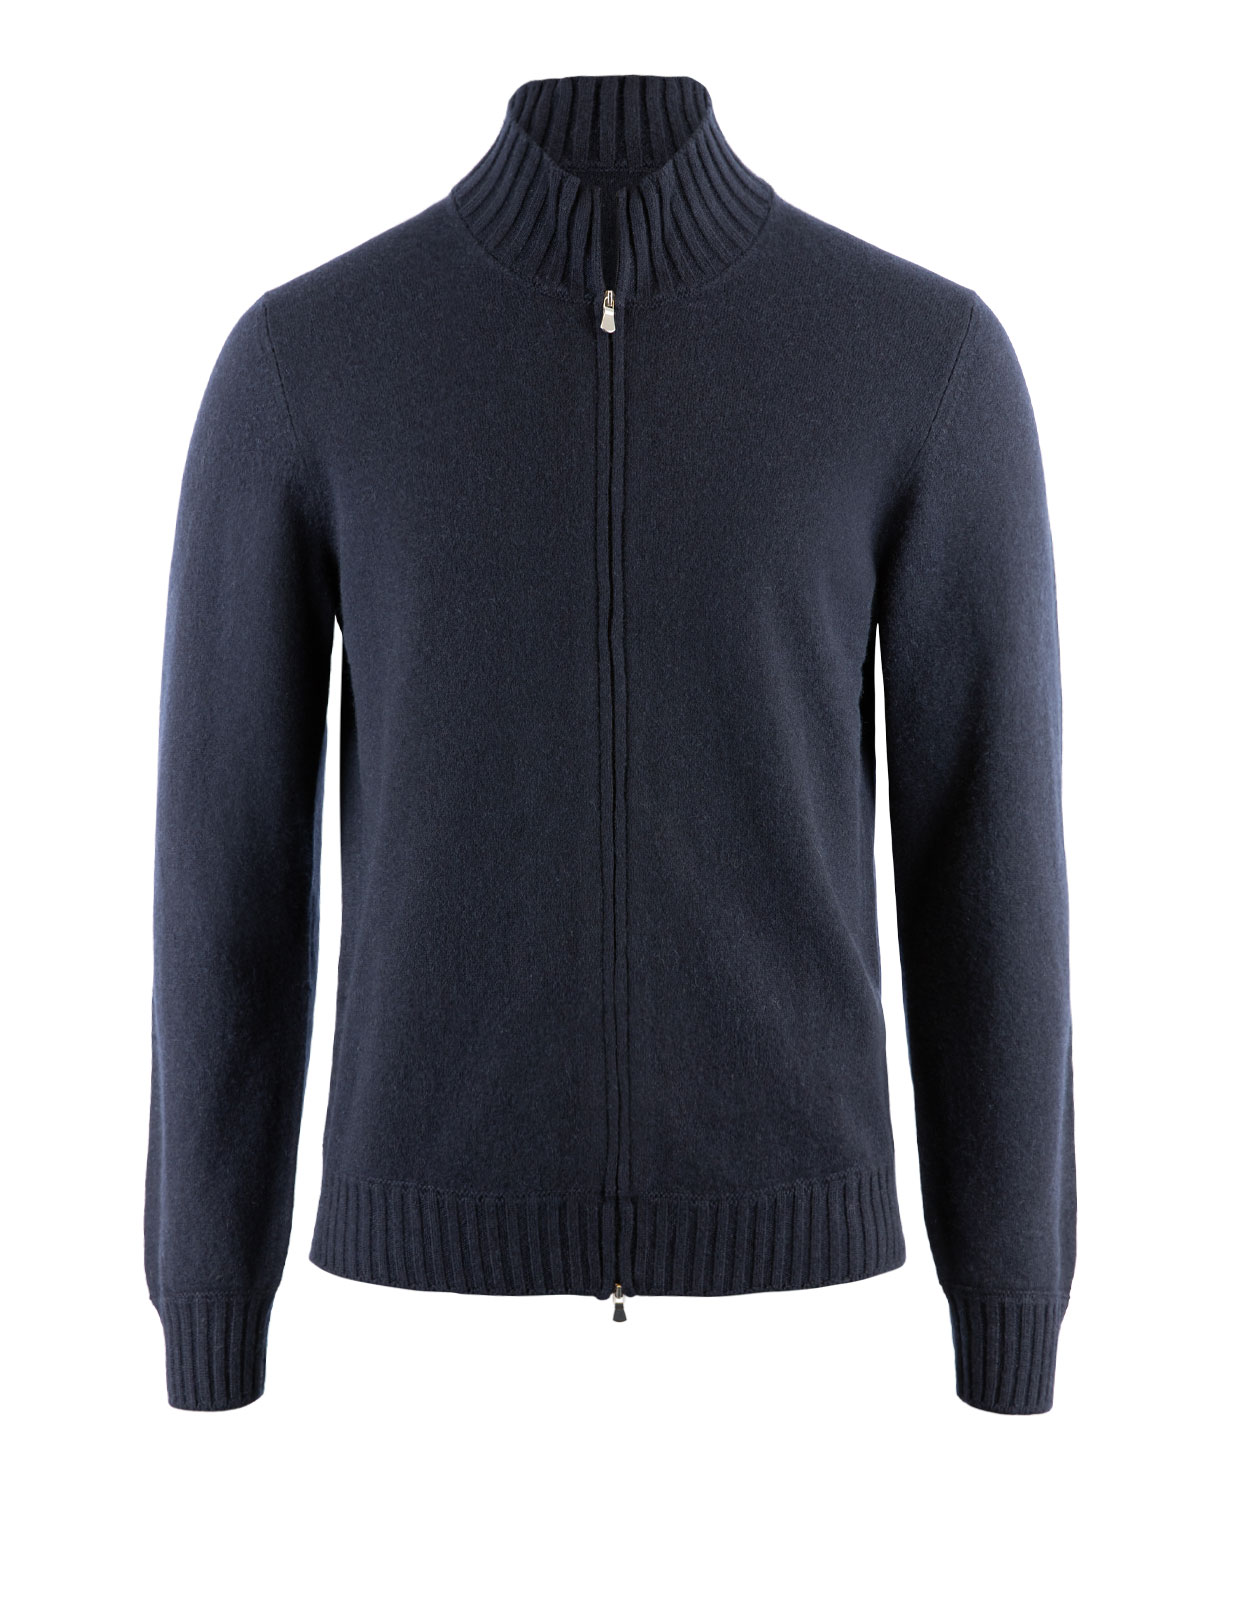 Full Zip Cardigan Felted Cashmere Navy Stl 48